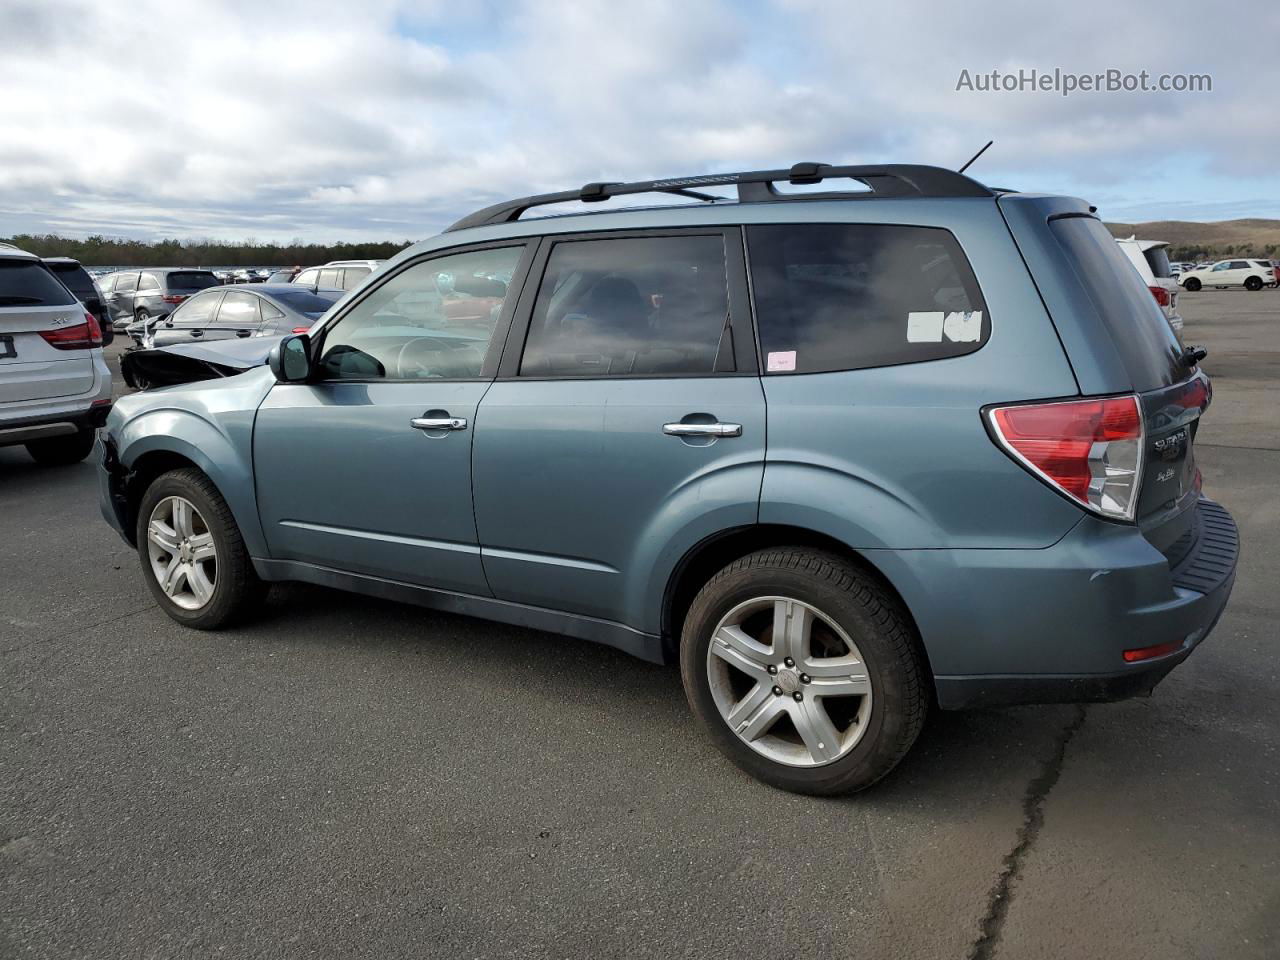 2009 Subaru Forester 2.5x Limited Gray vin: JF2SH64649H762069